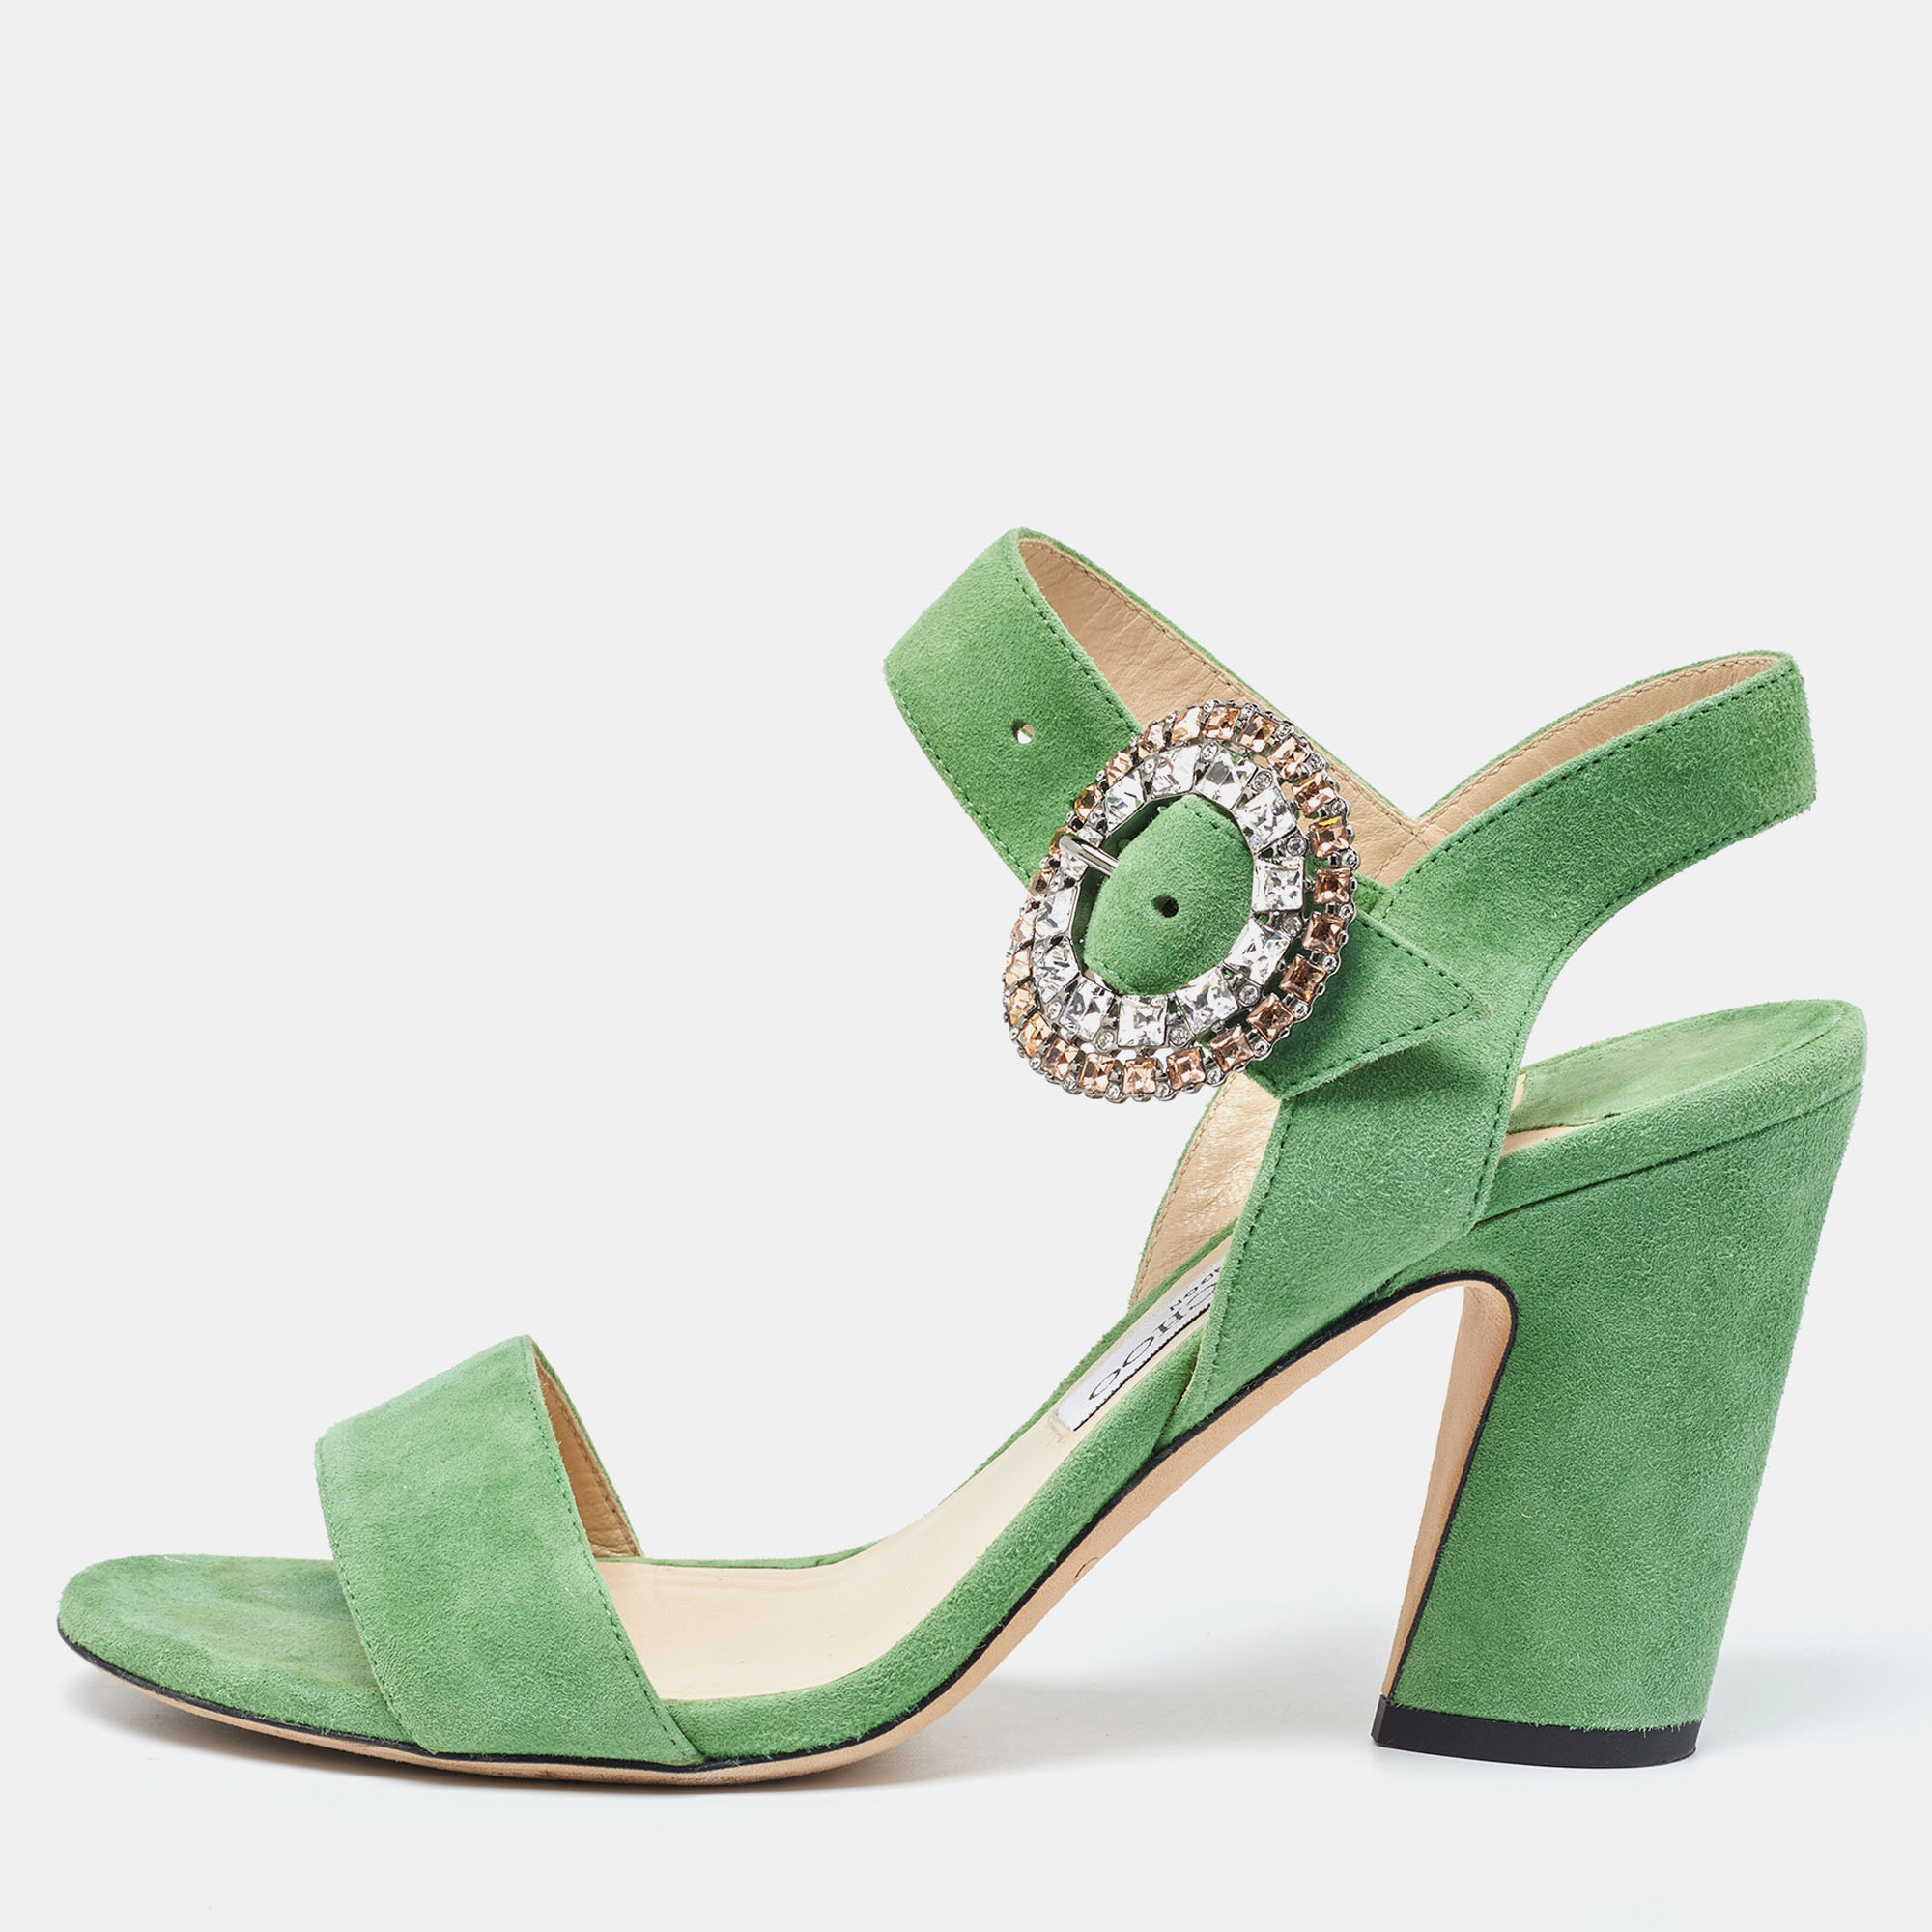 Pre-owned Jimmy Choo Green Suede Ankle Strap Sandals Size 38.5